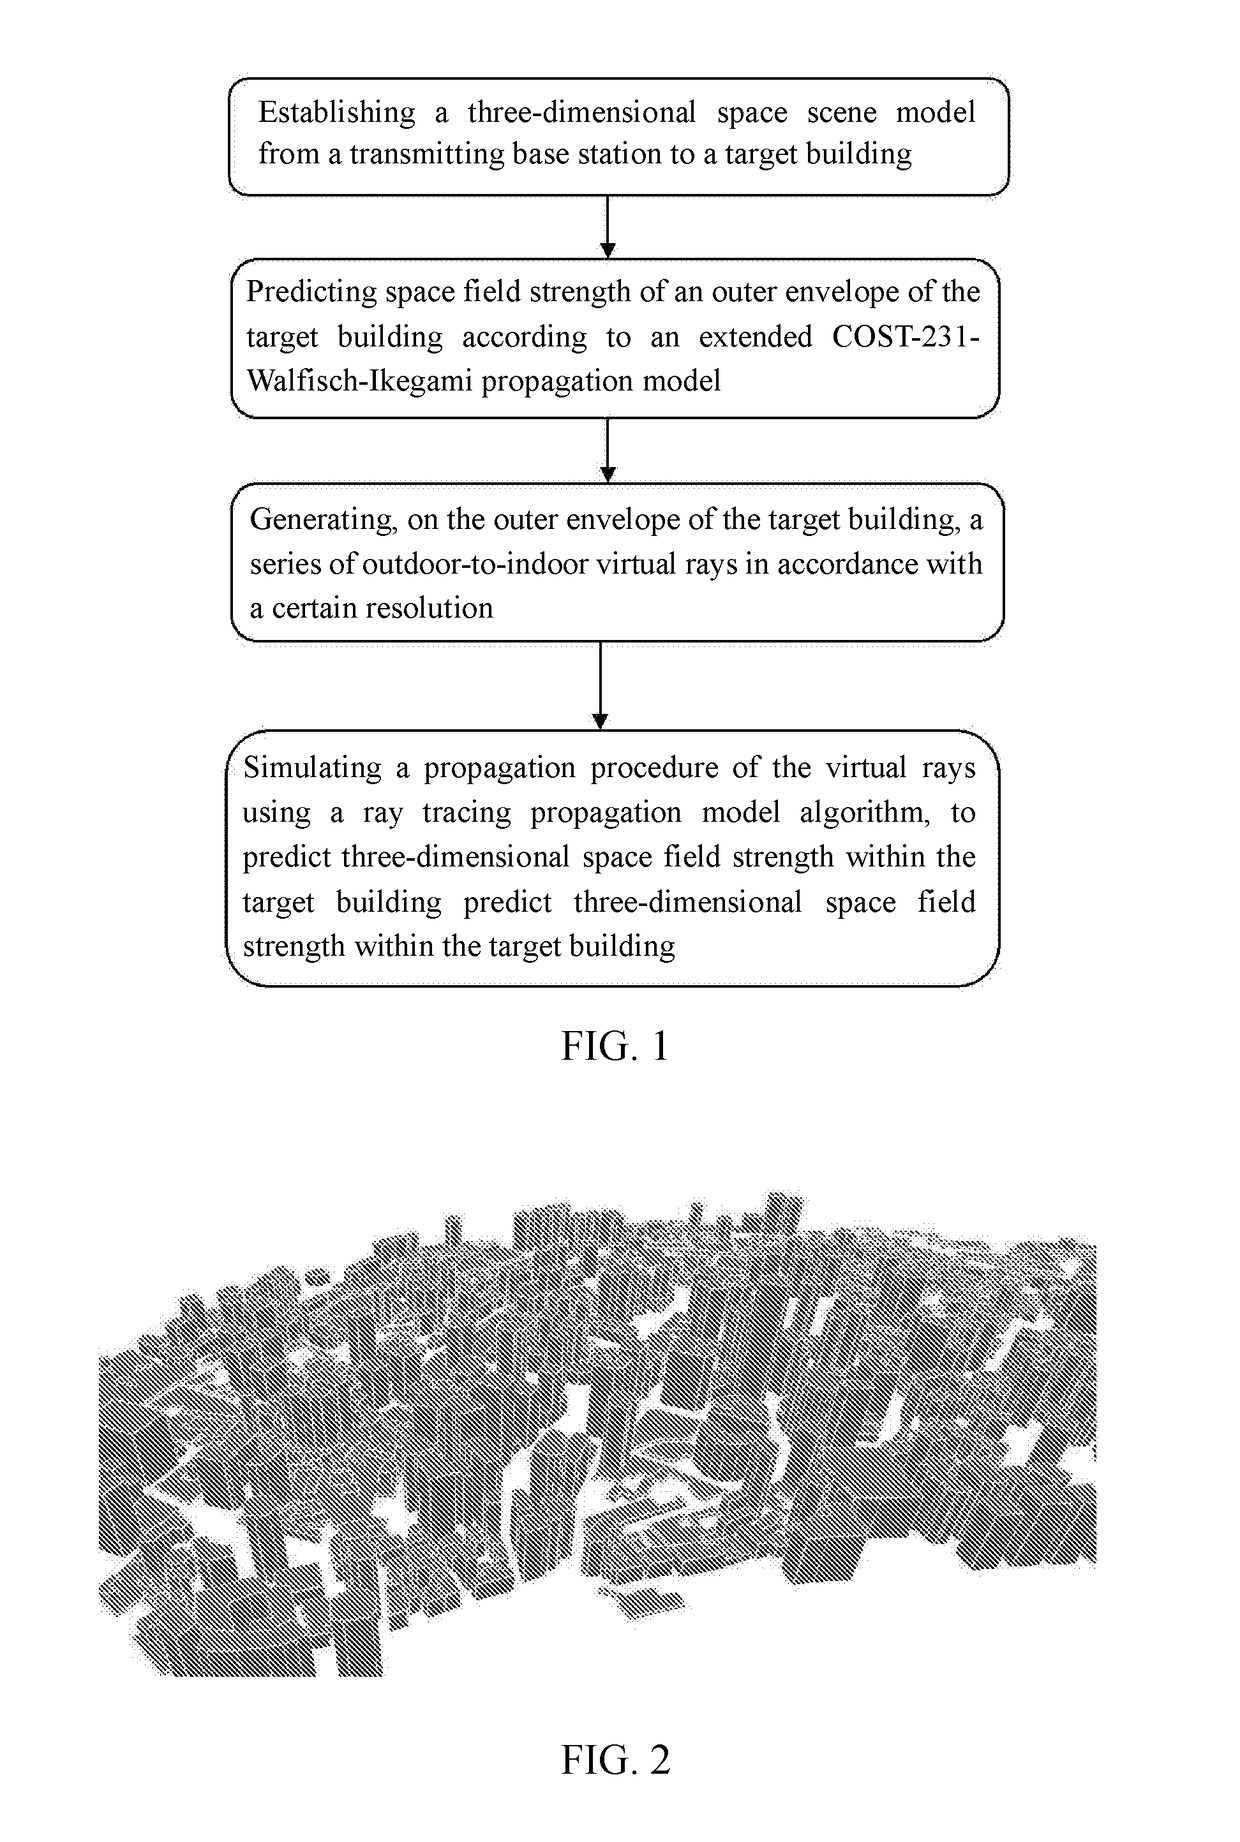 Method for predicting indoor three-dimensional space signal field strength using an outdoor-to-indoor propagation model